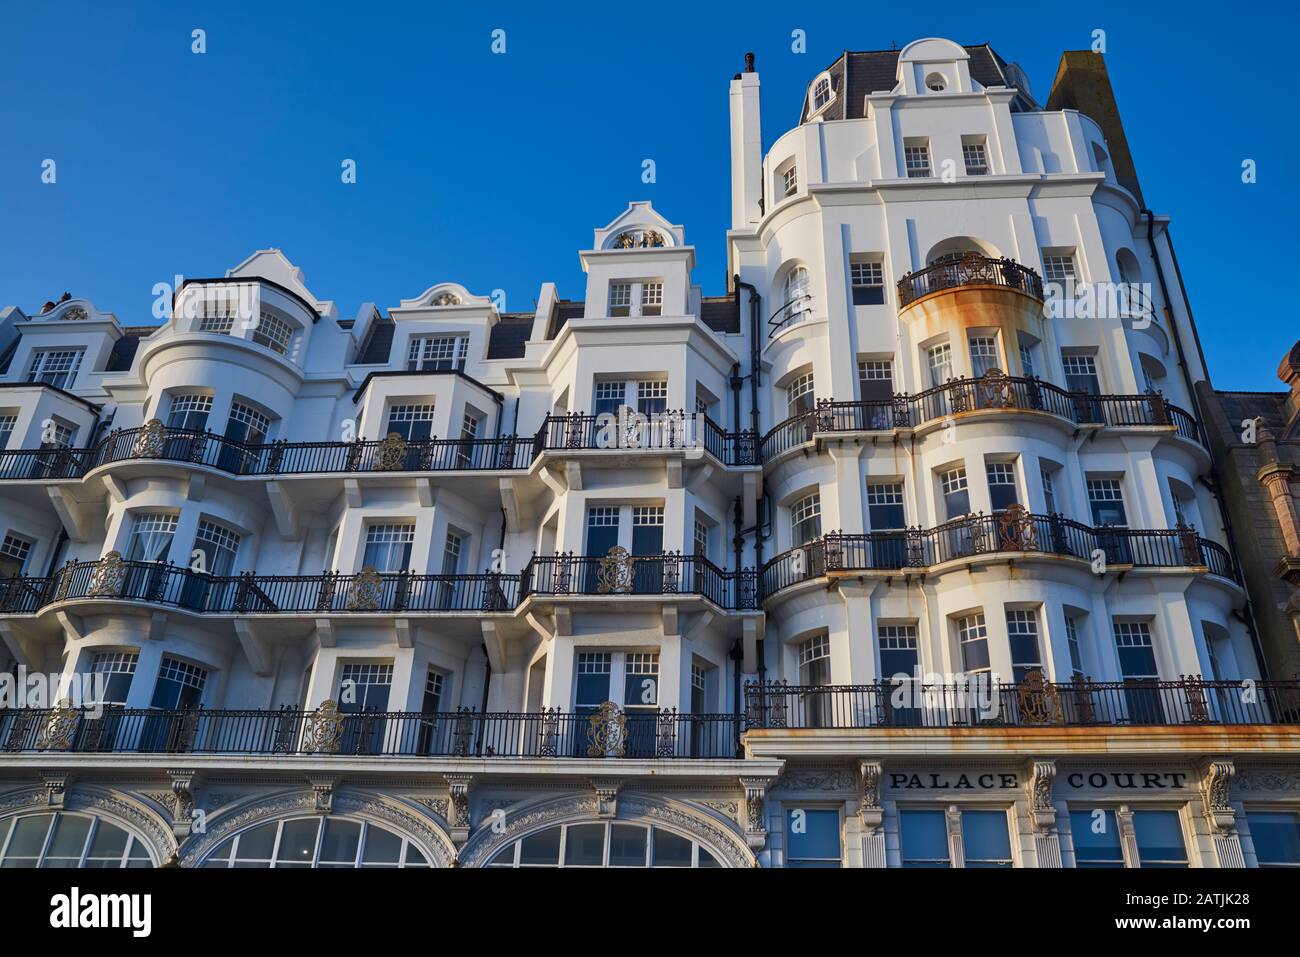 The Victorian Palace Court building in the White Rock area of Hastings seafront, East Sussex, UK Stock Photo